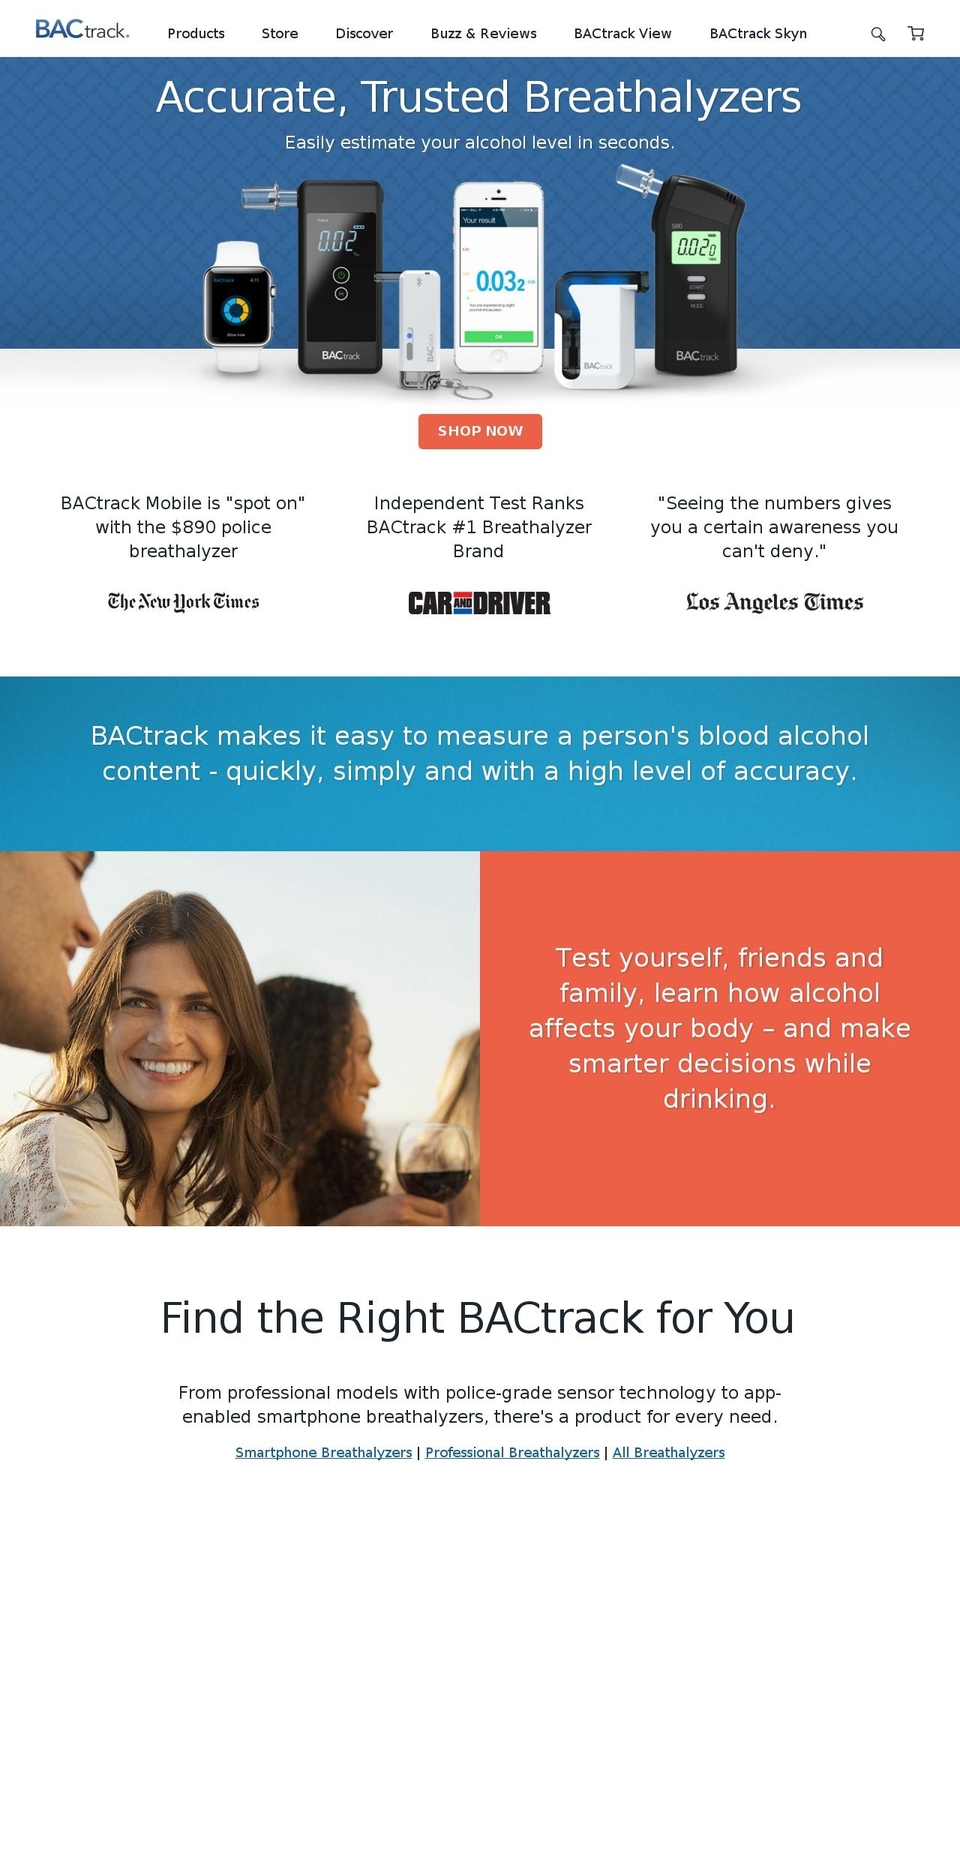 Parallax Shopify theme site example bactrack.com